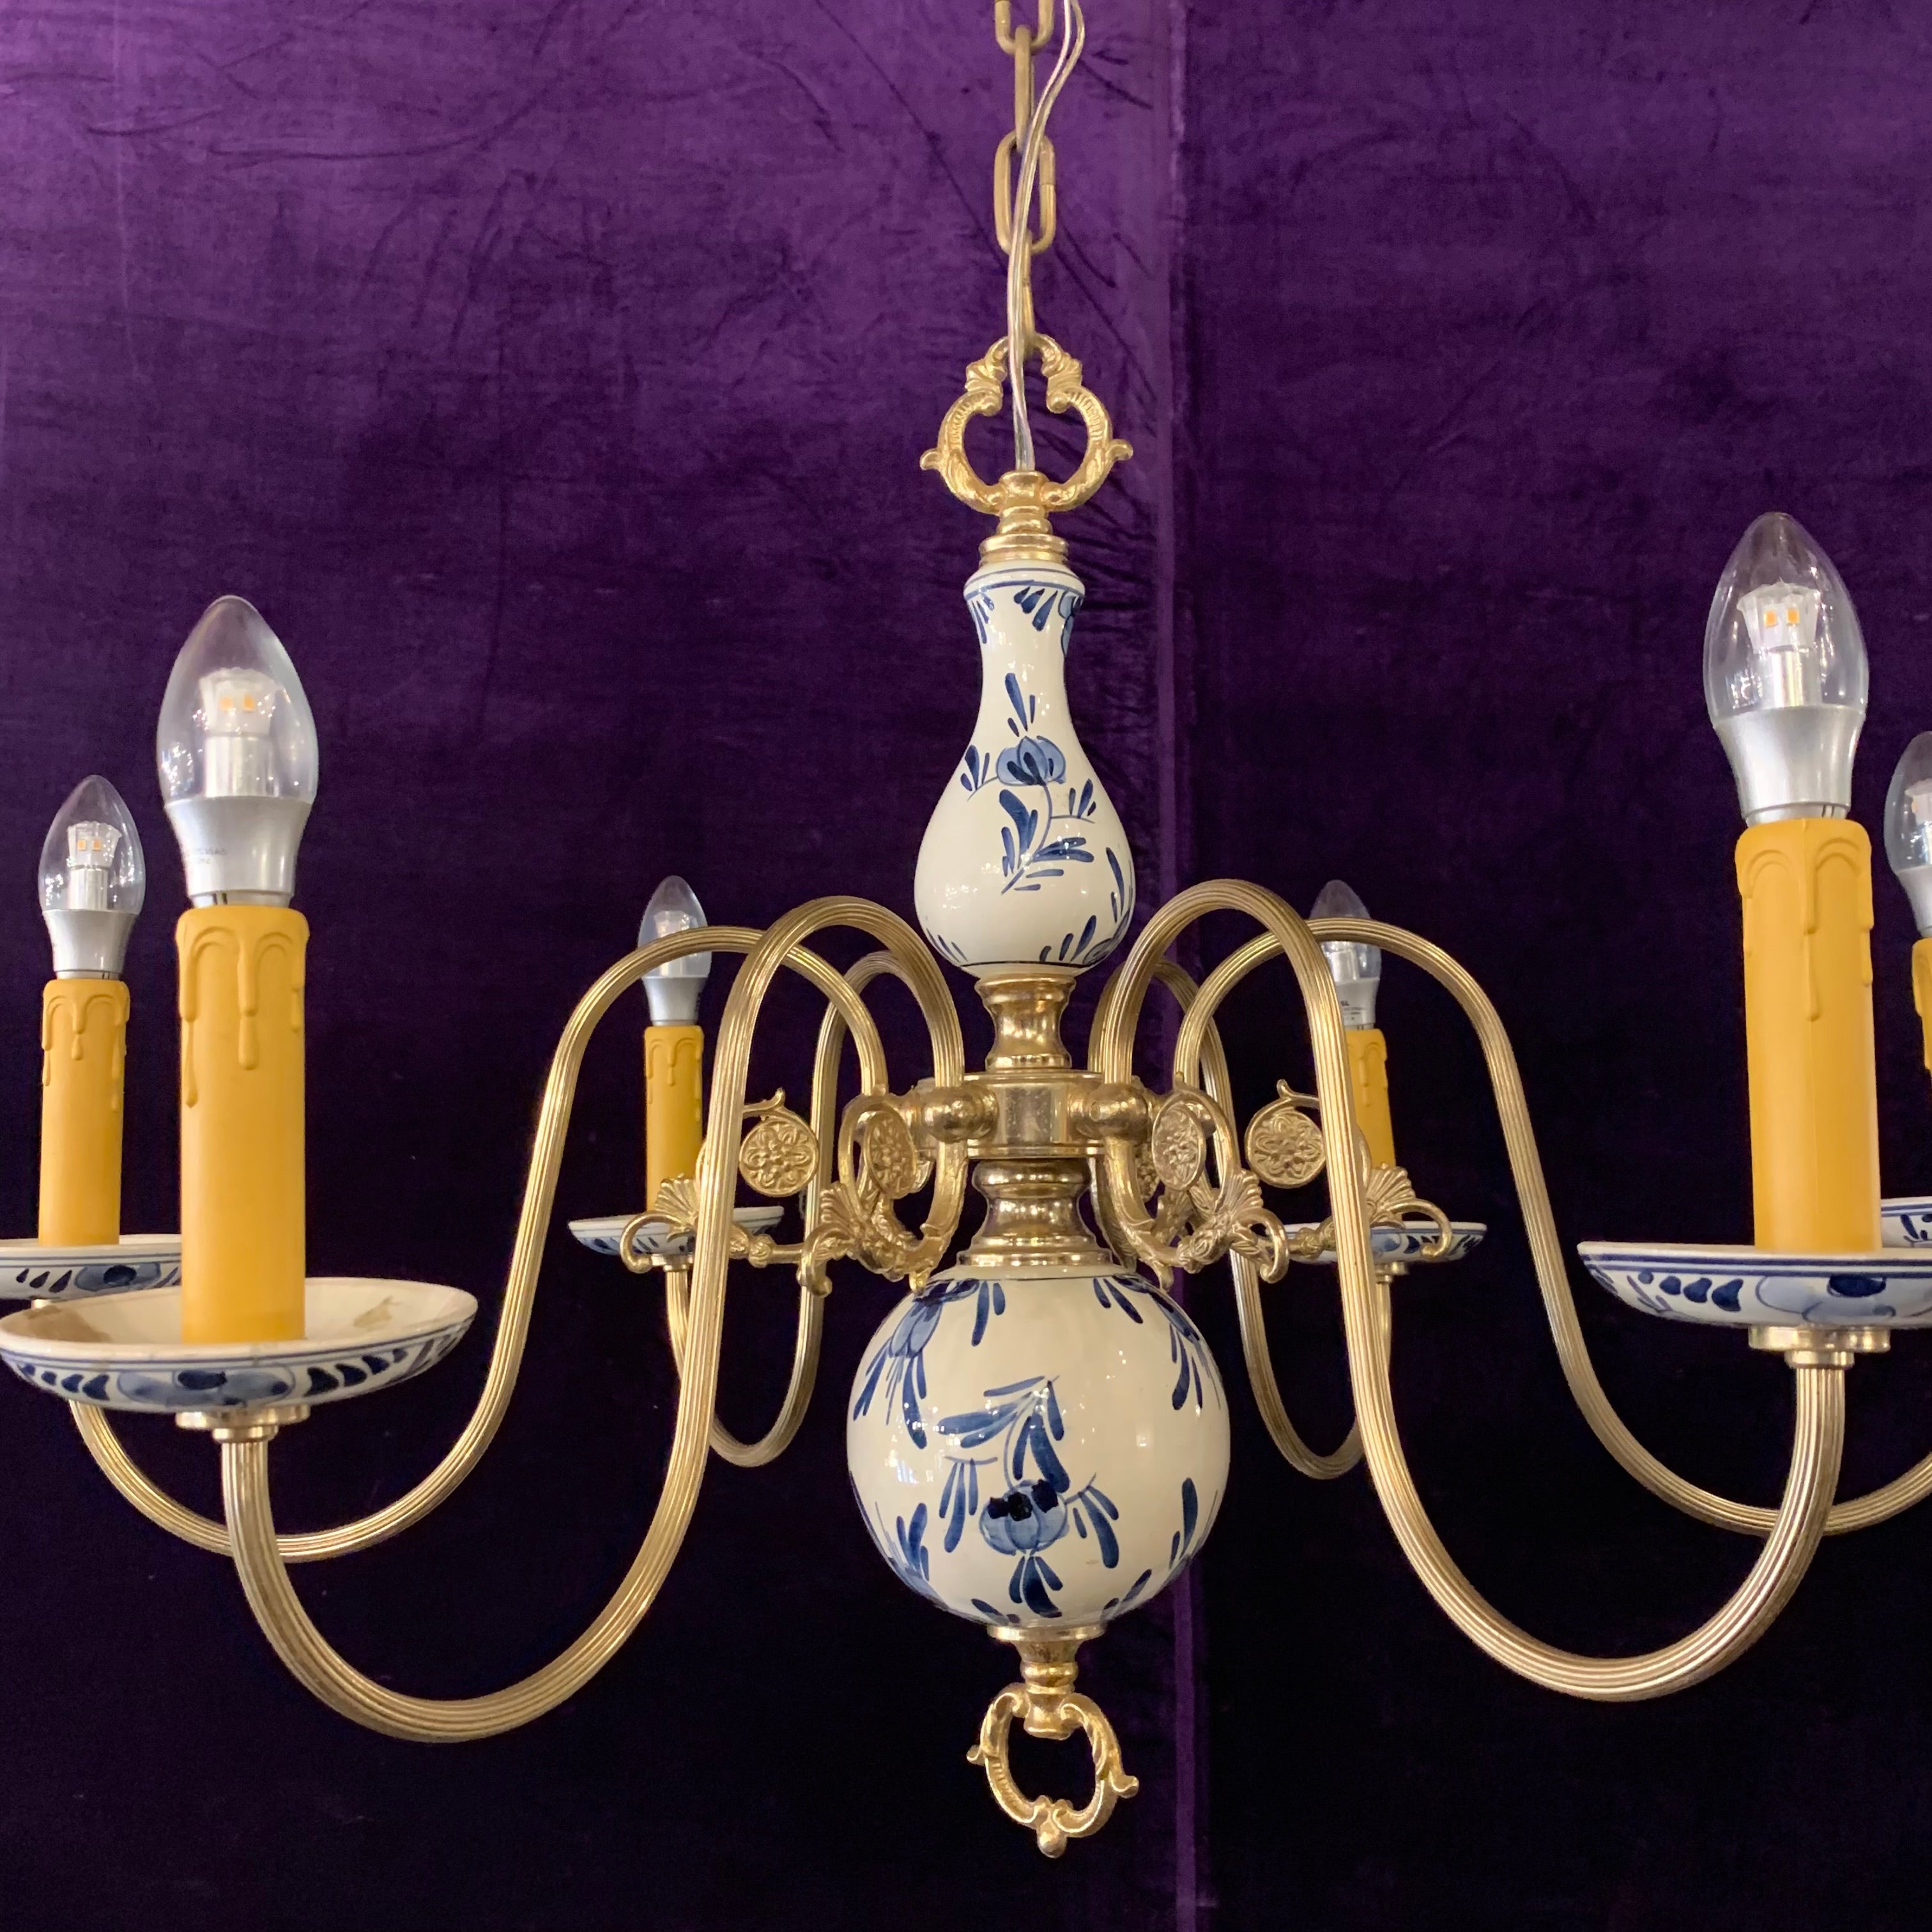 Delft Porcelain Chandelier with Hand Painted Olives